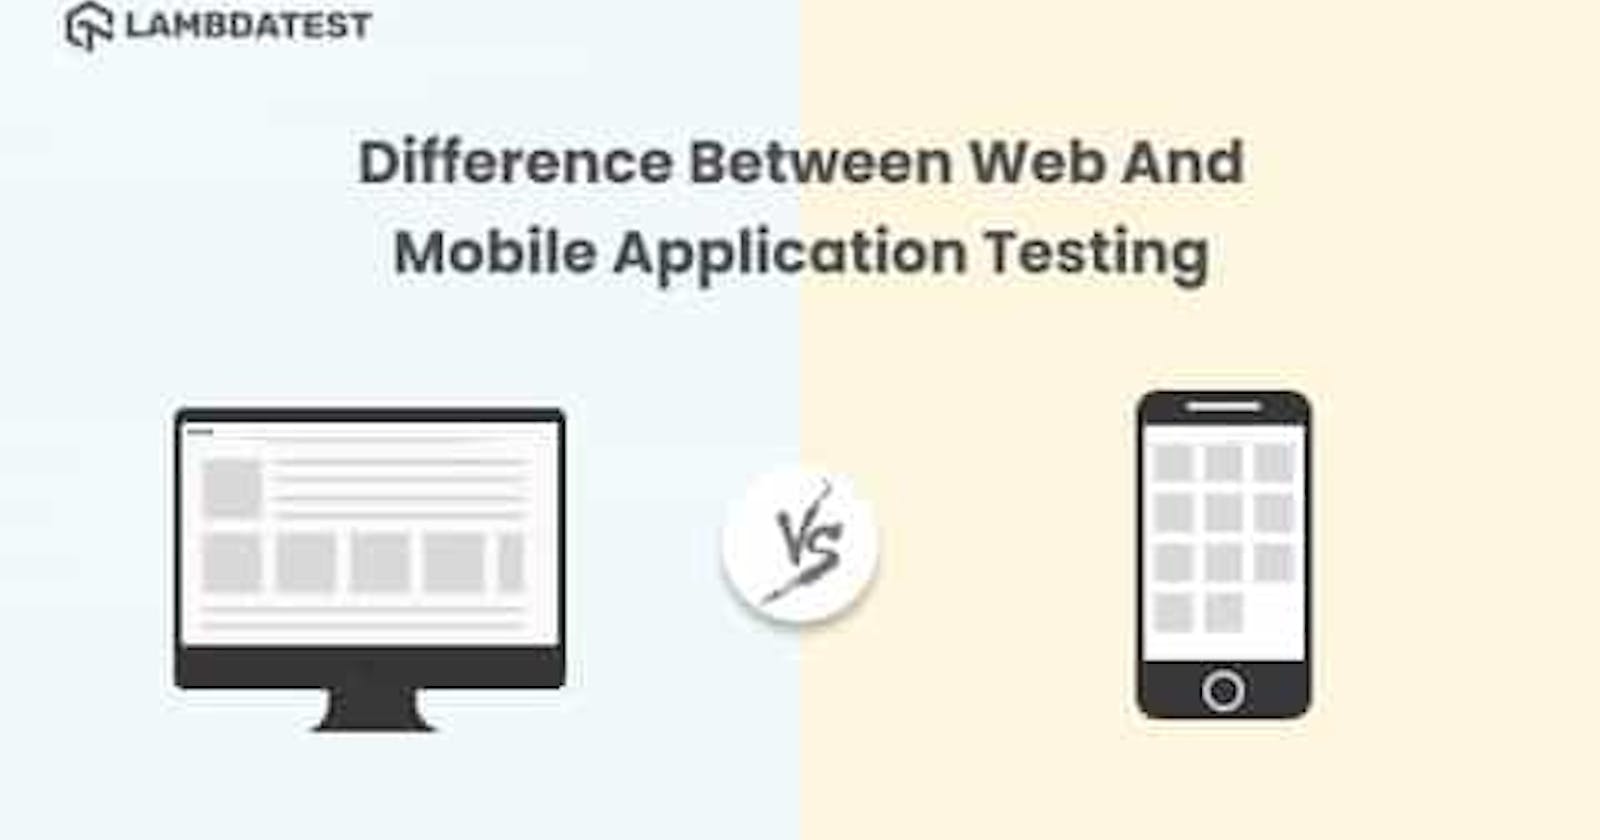 Difference Between Web And Mobile Application Testing